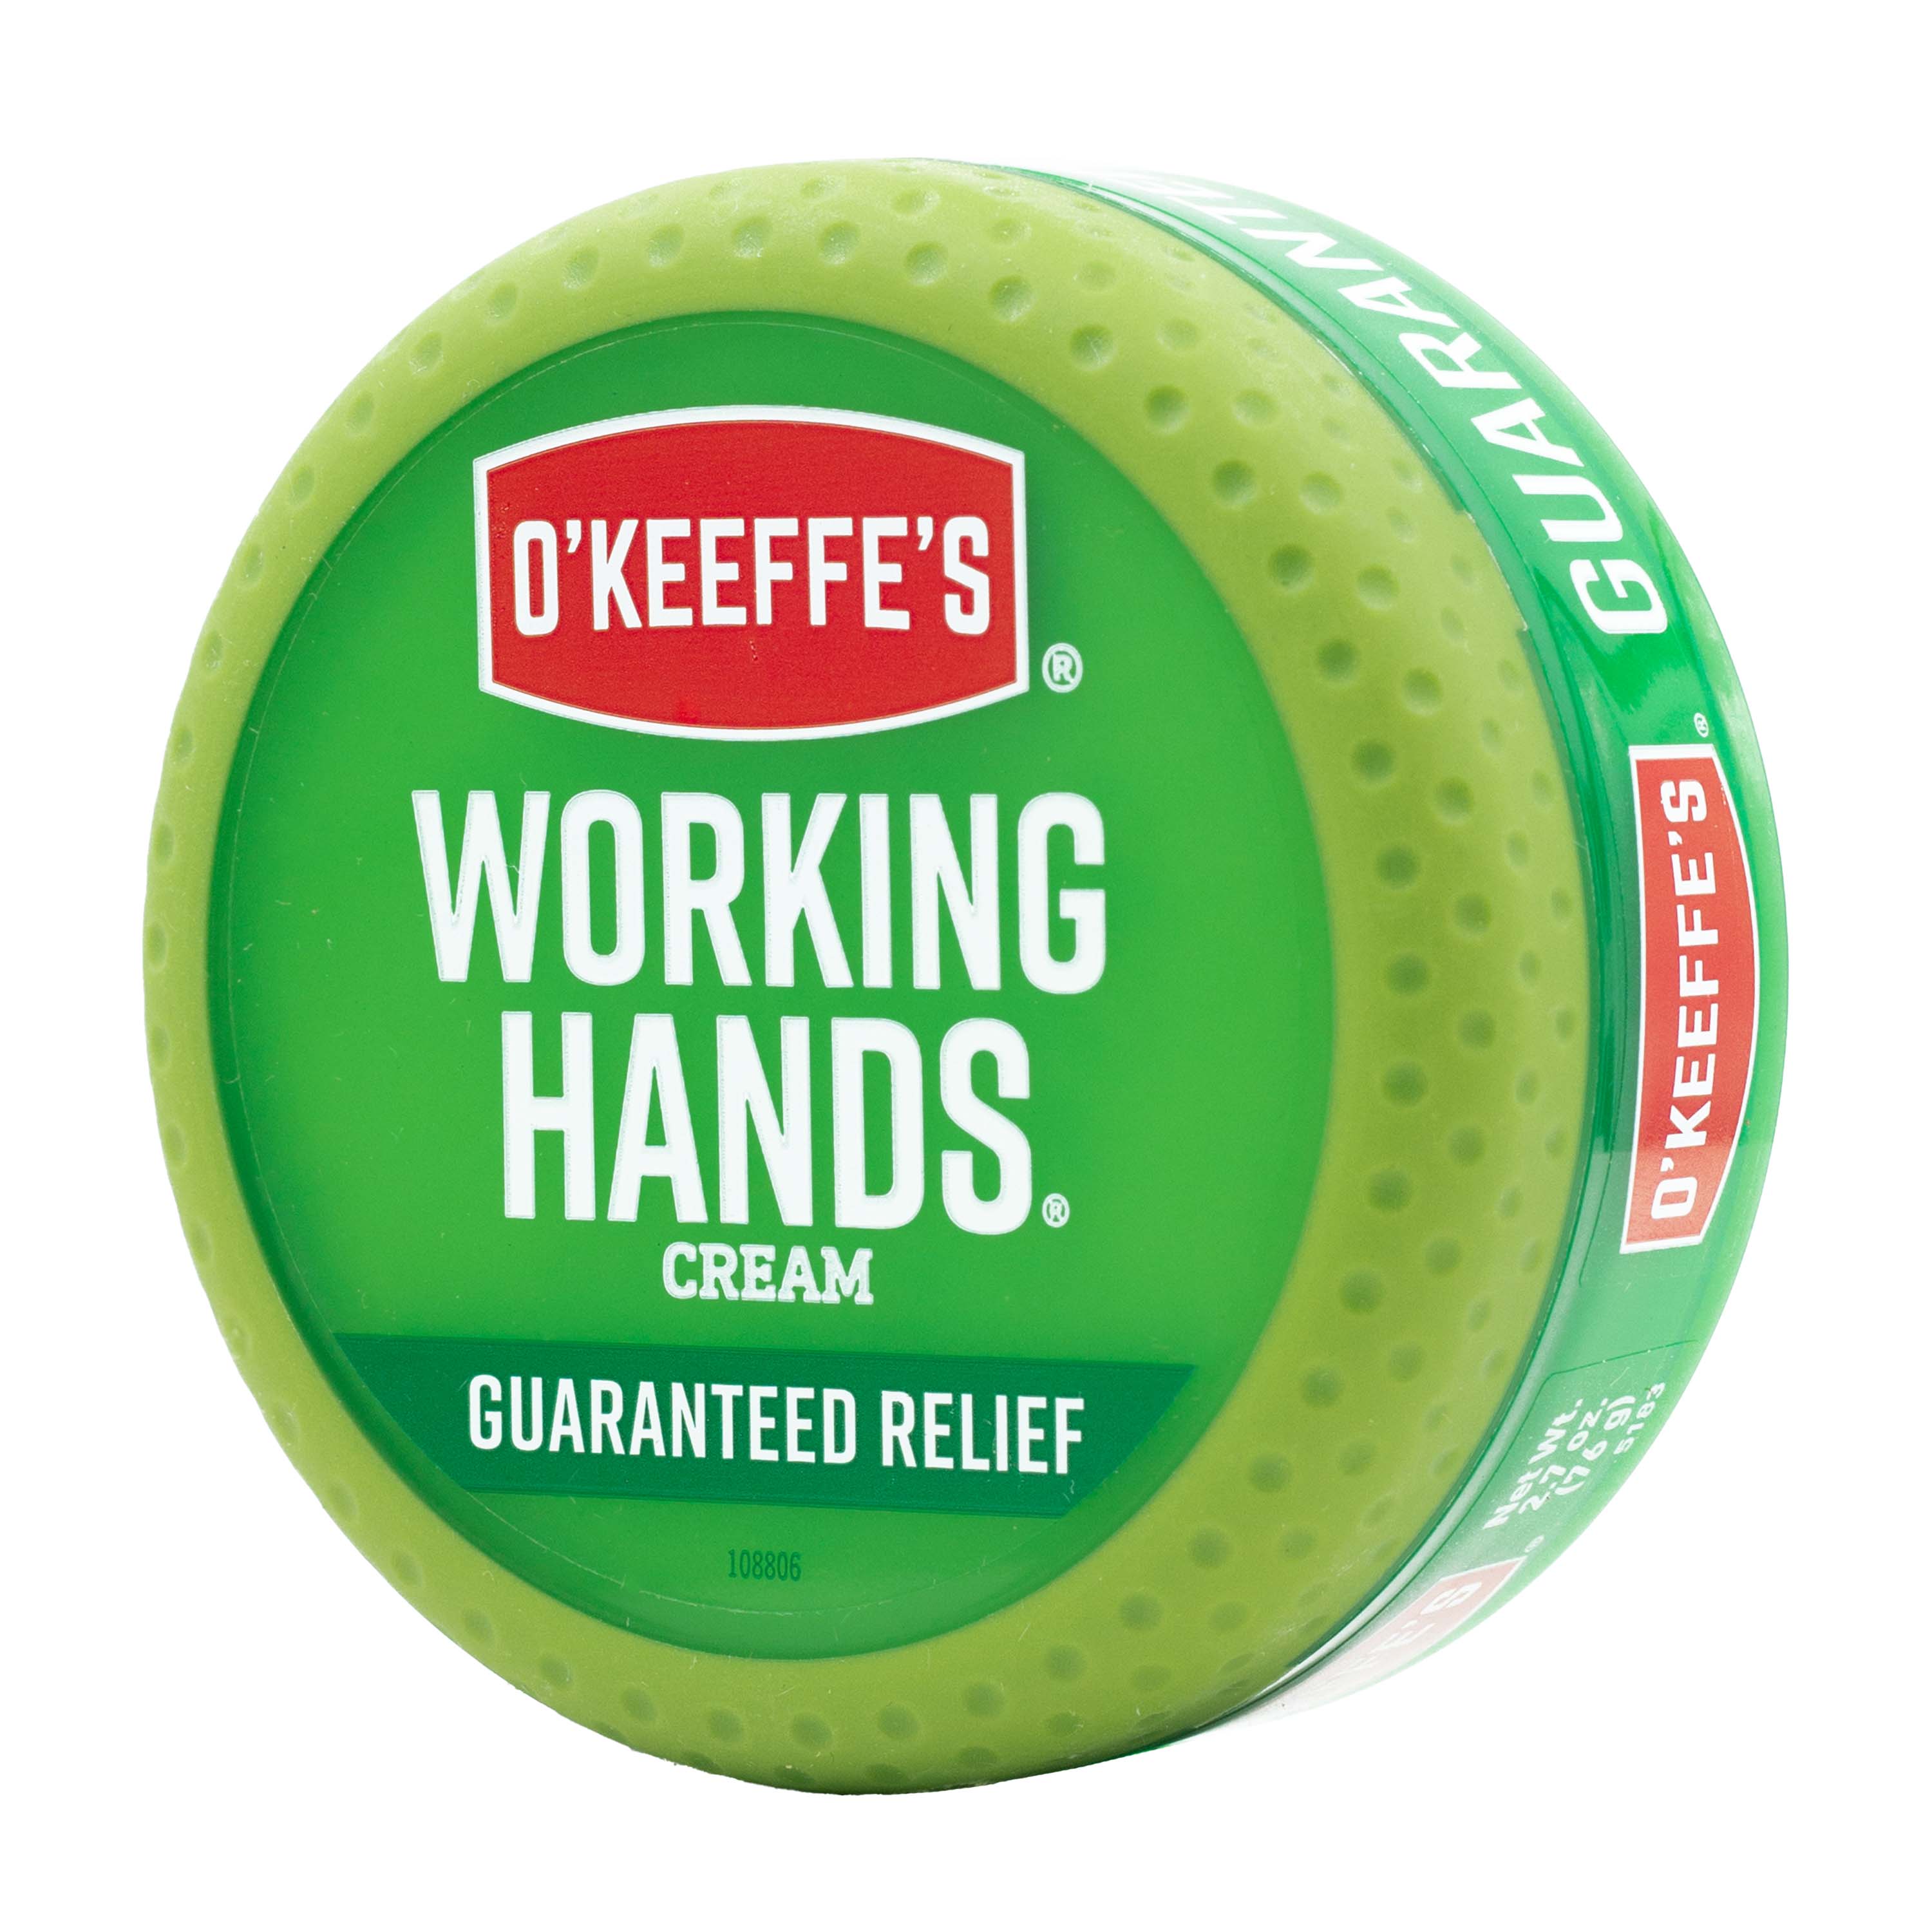 O'Keeffe's Working Hands Hand Cream for Extremely Dry